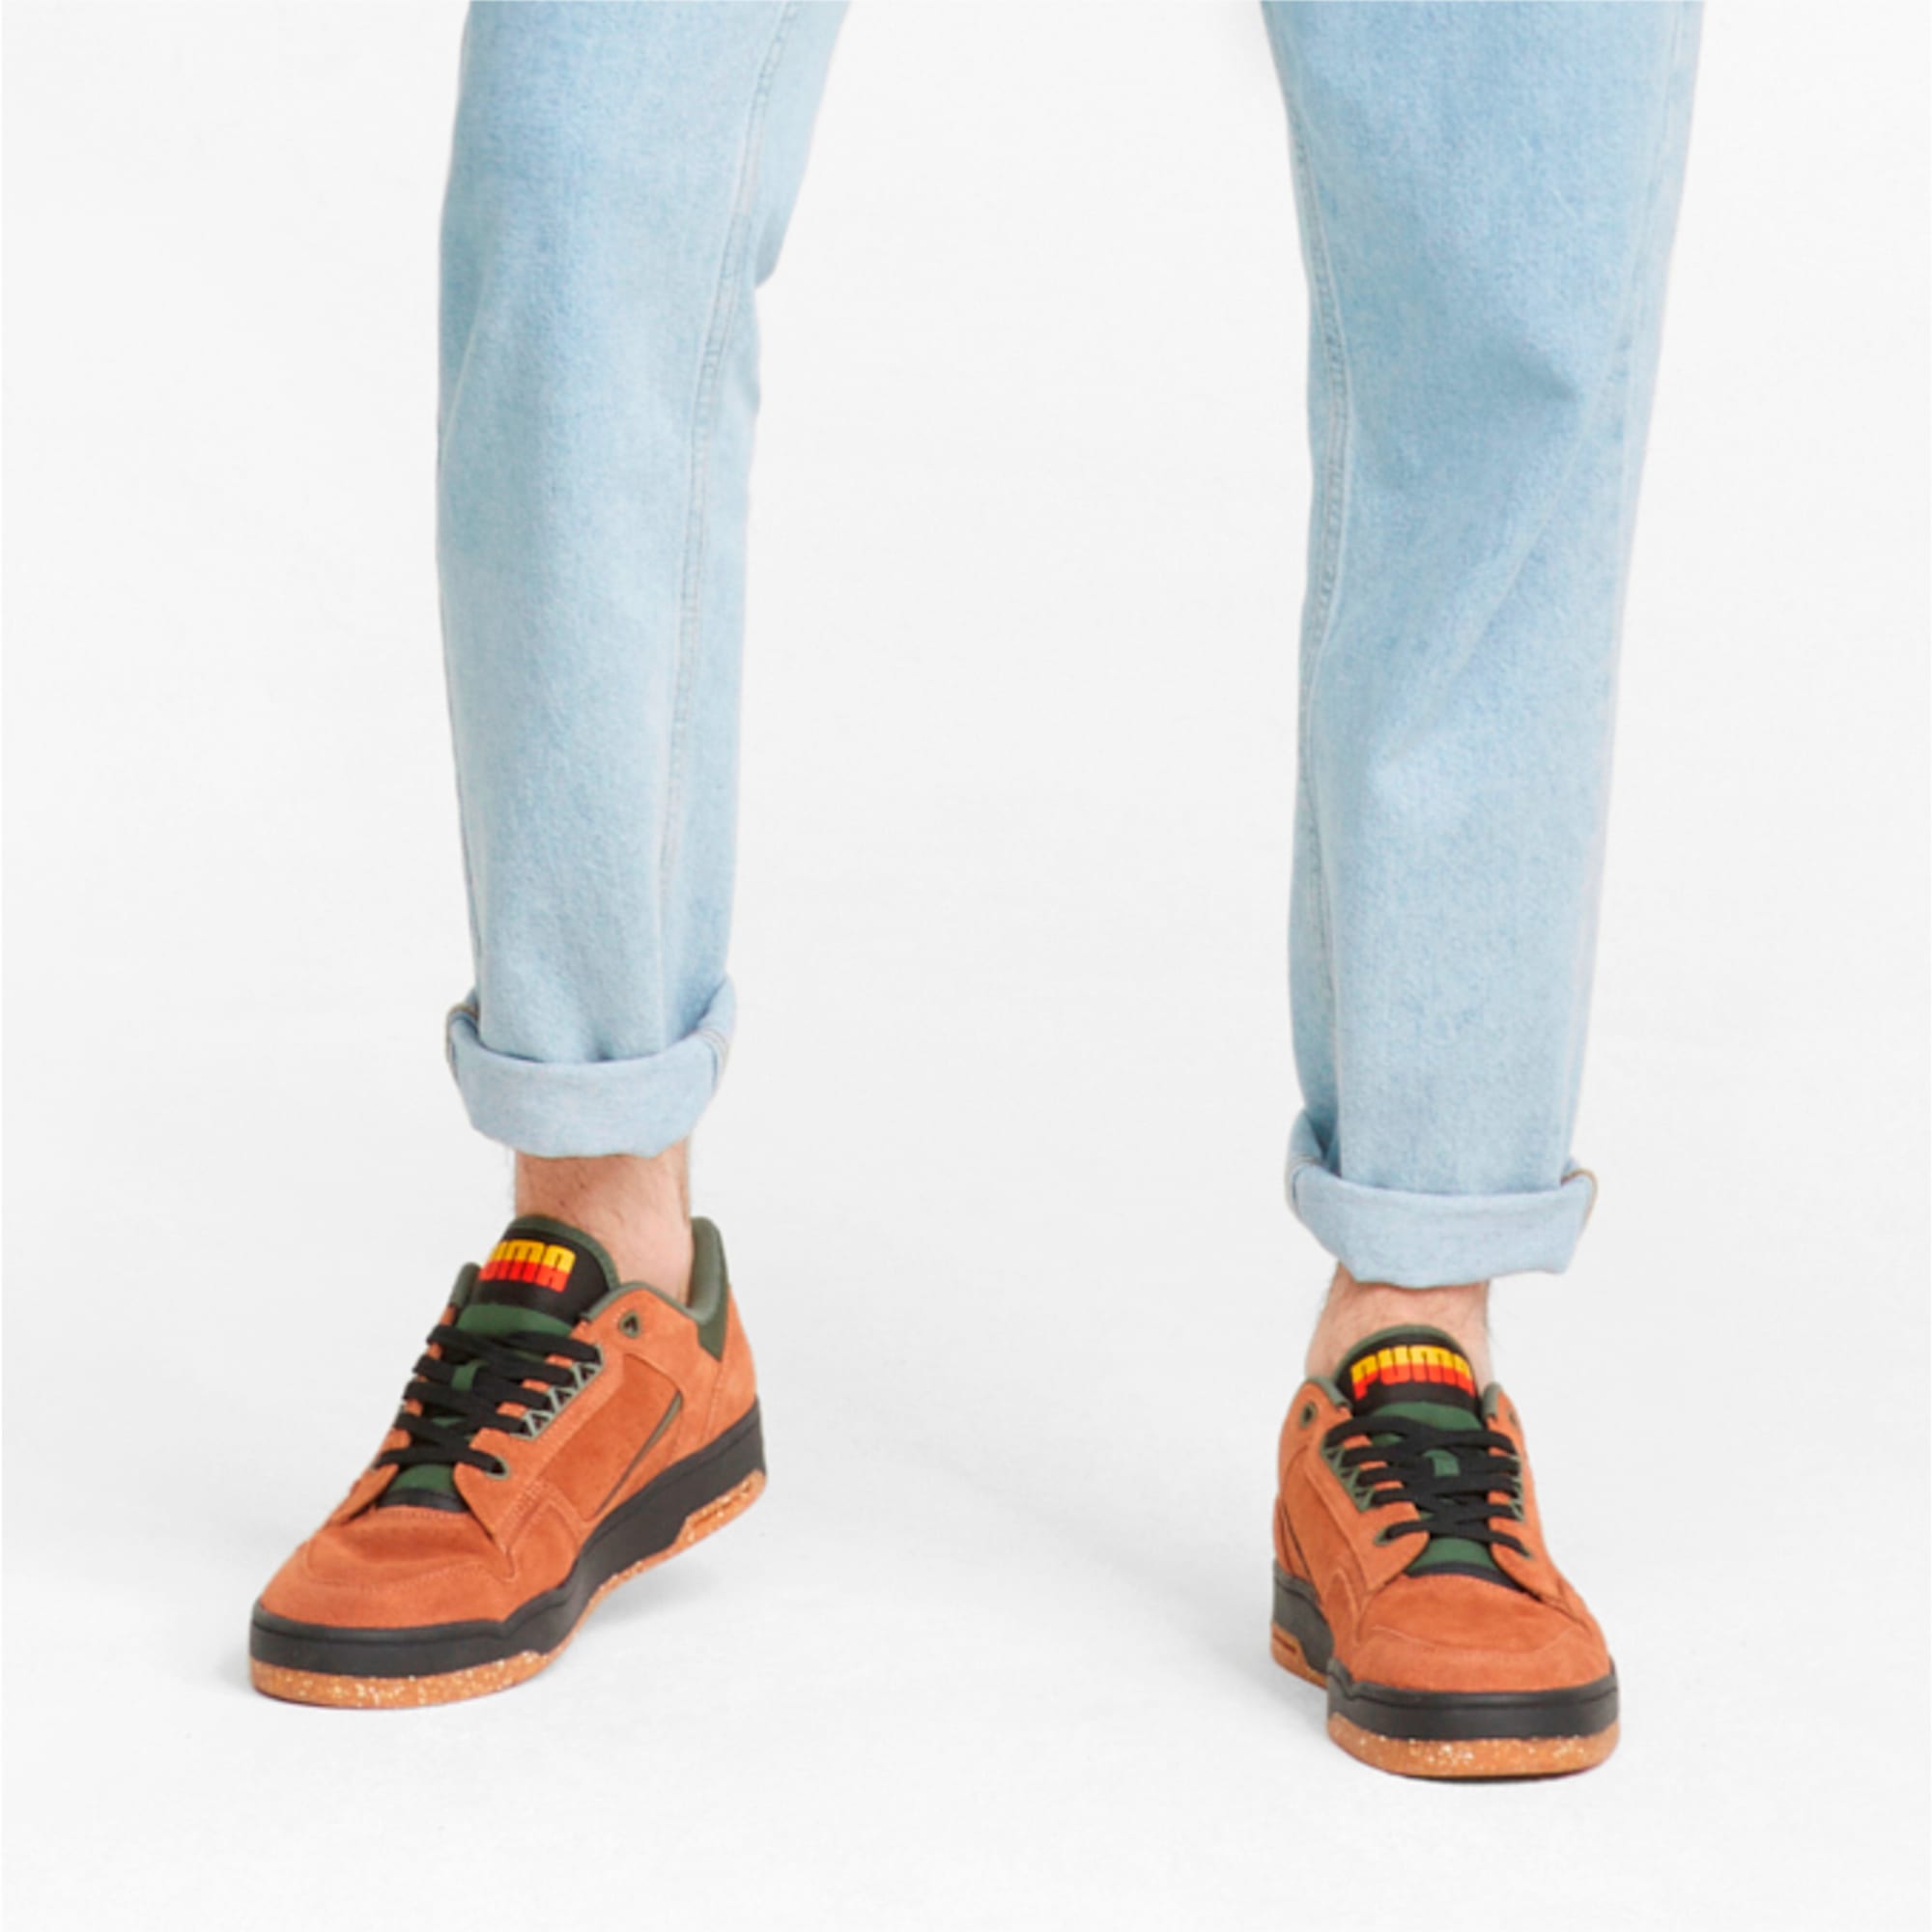 Butter Goods Slipstream Lo Sneakers